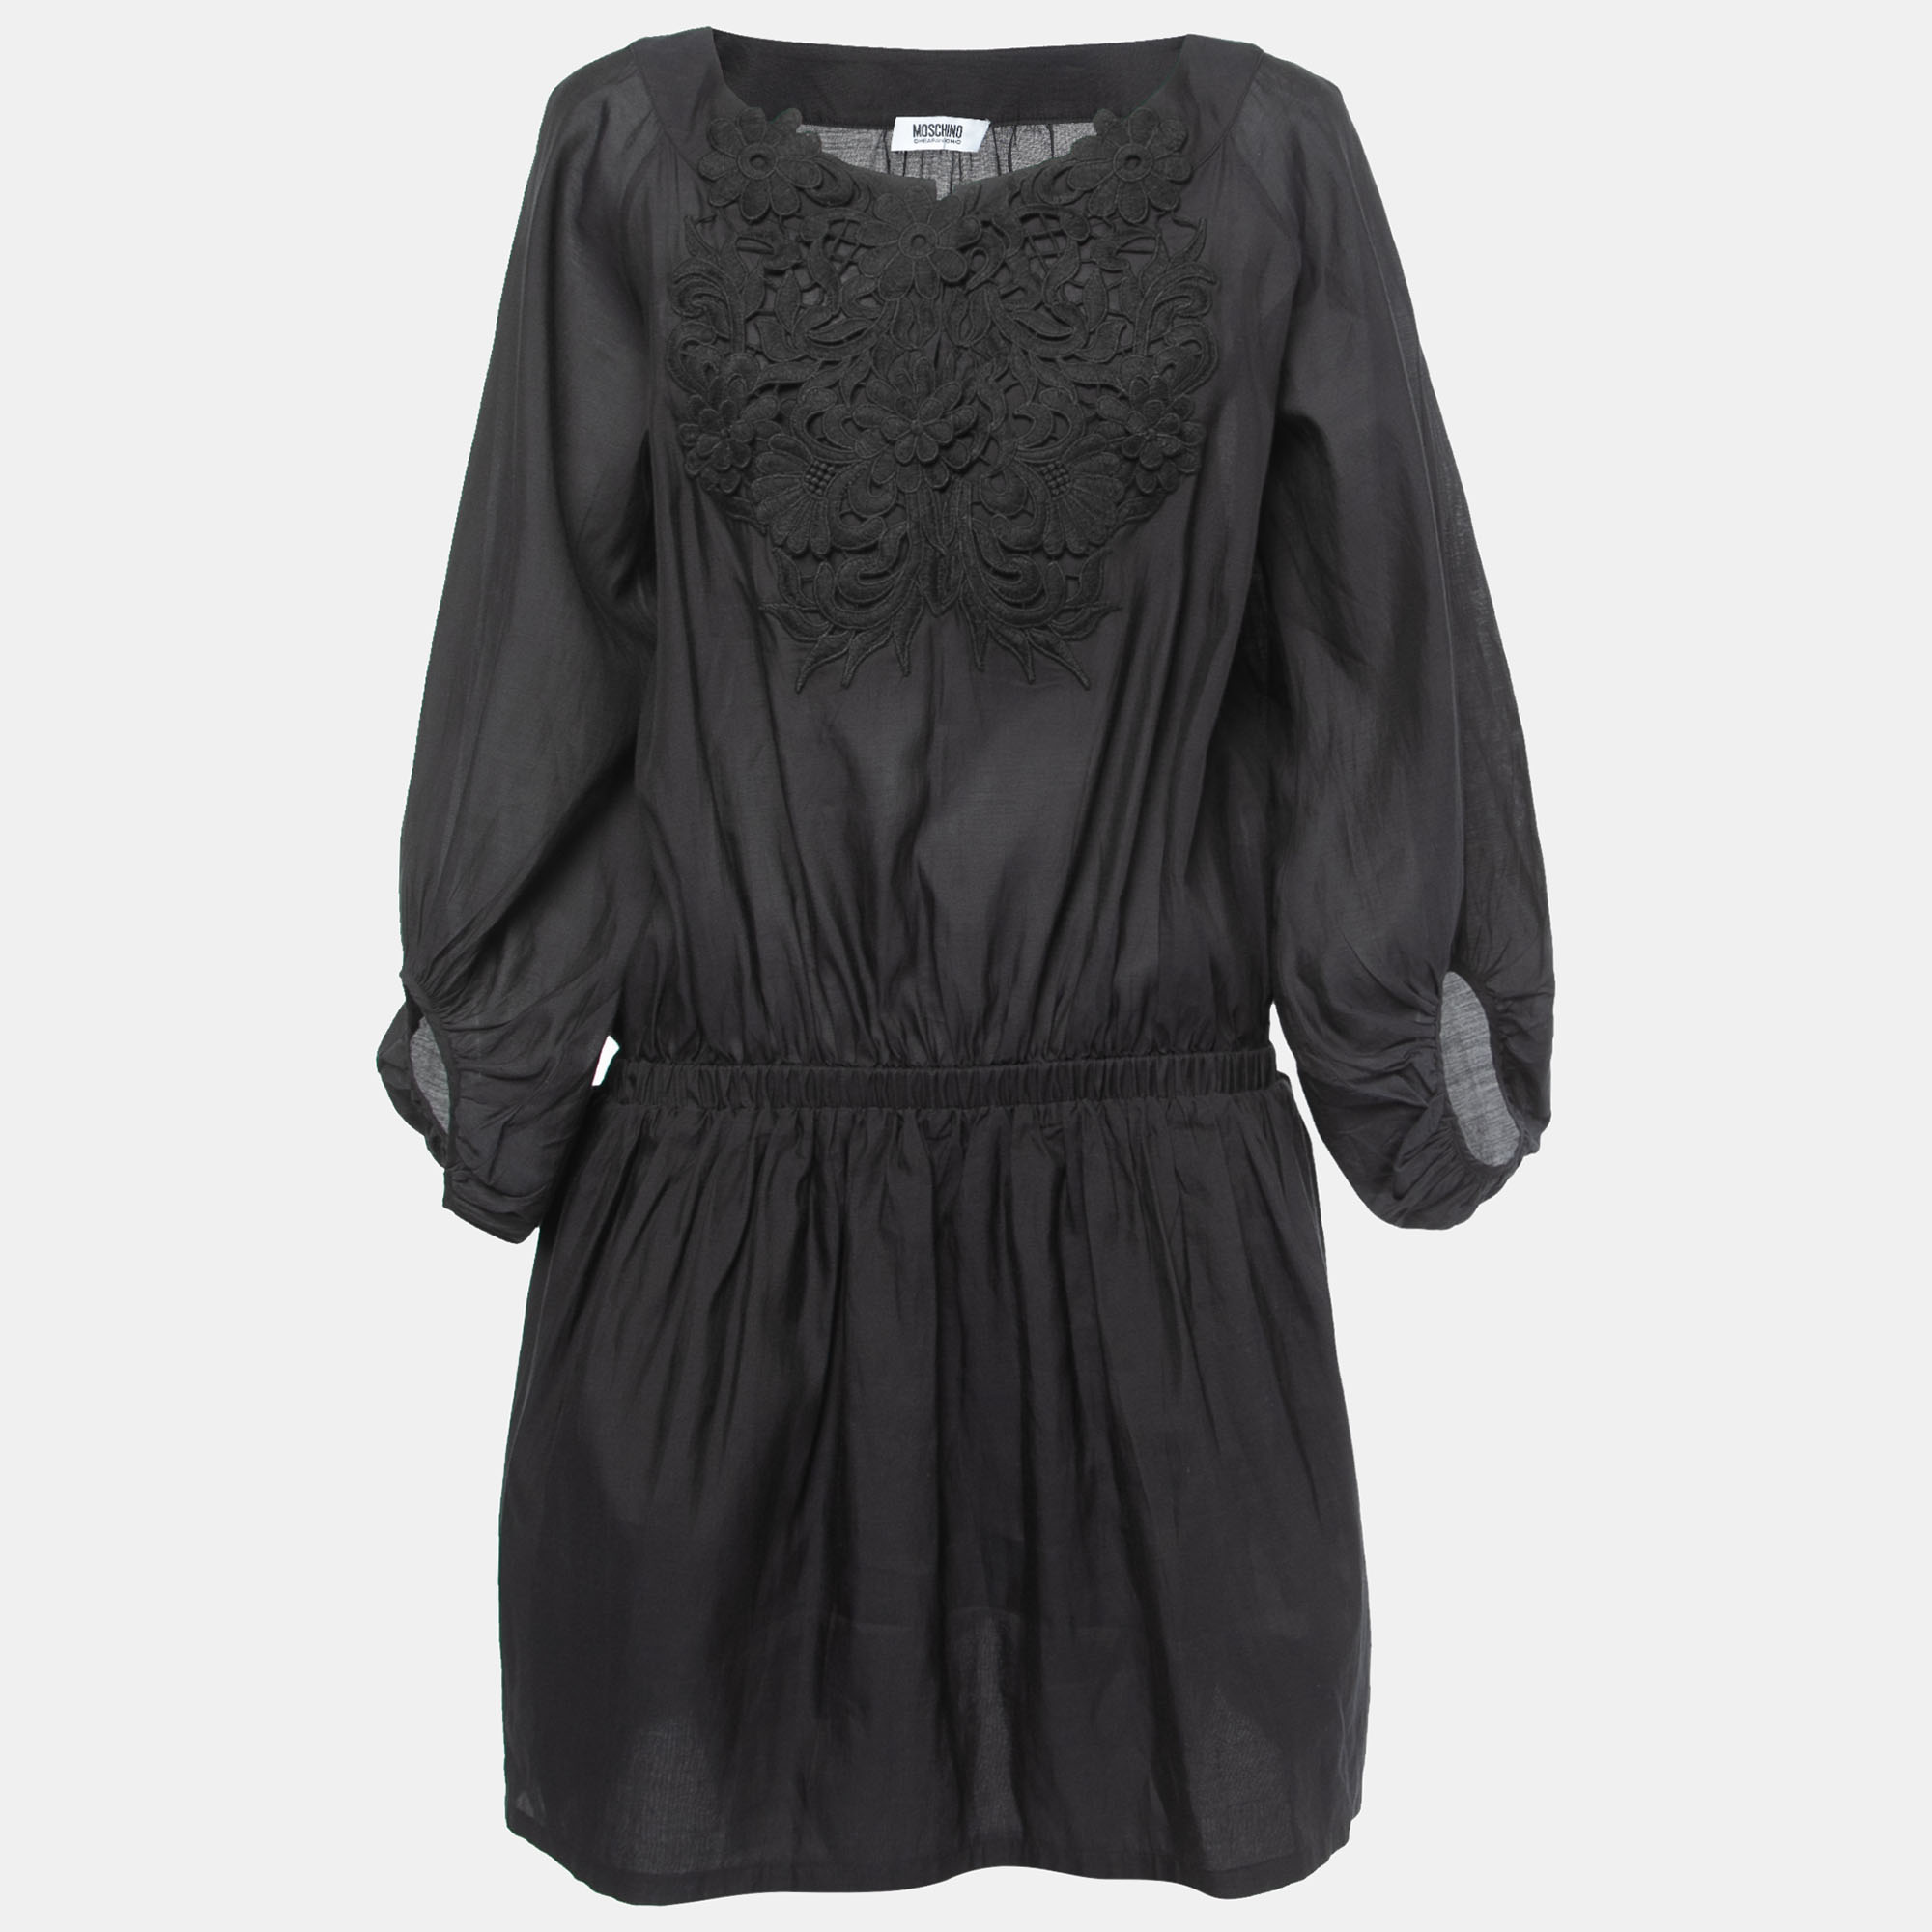 Pre-owned Moschino Cheap And Chic Moschino Cheap & Chic Black Cotton Lace Trimmed Elasticized Waist Short Dress L